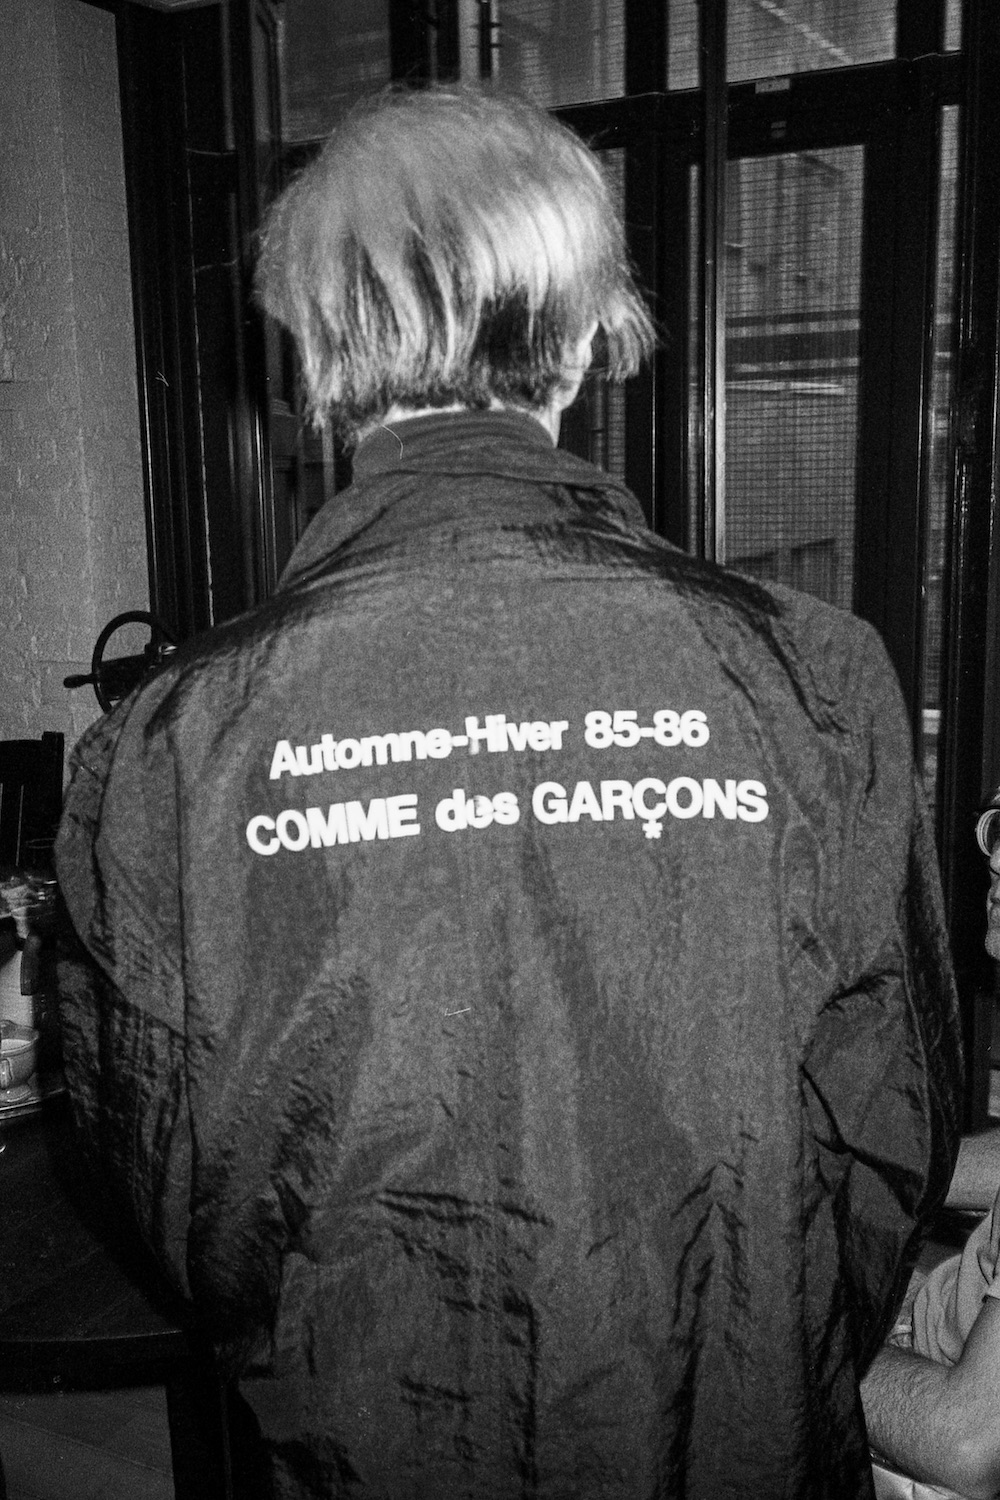 Andy Warhol modeling his new Comme des Garçons jacket at the Con